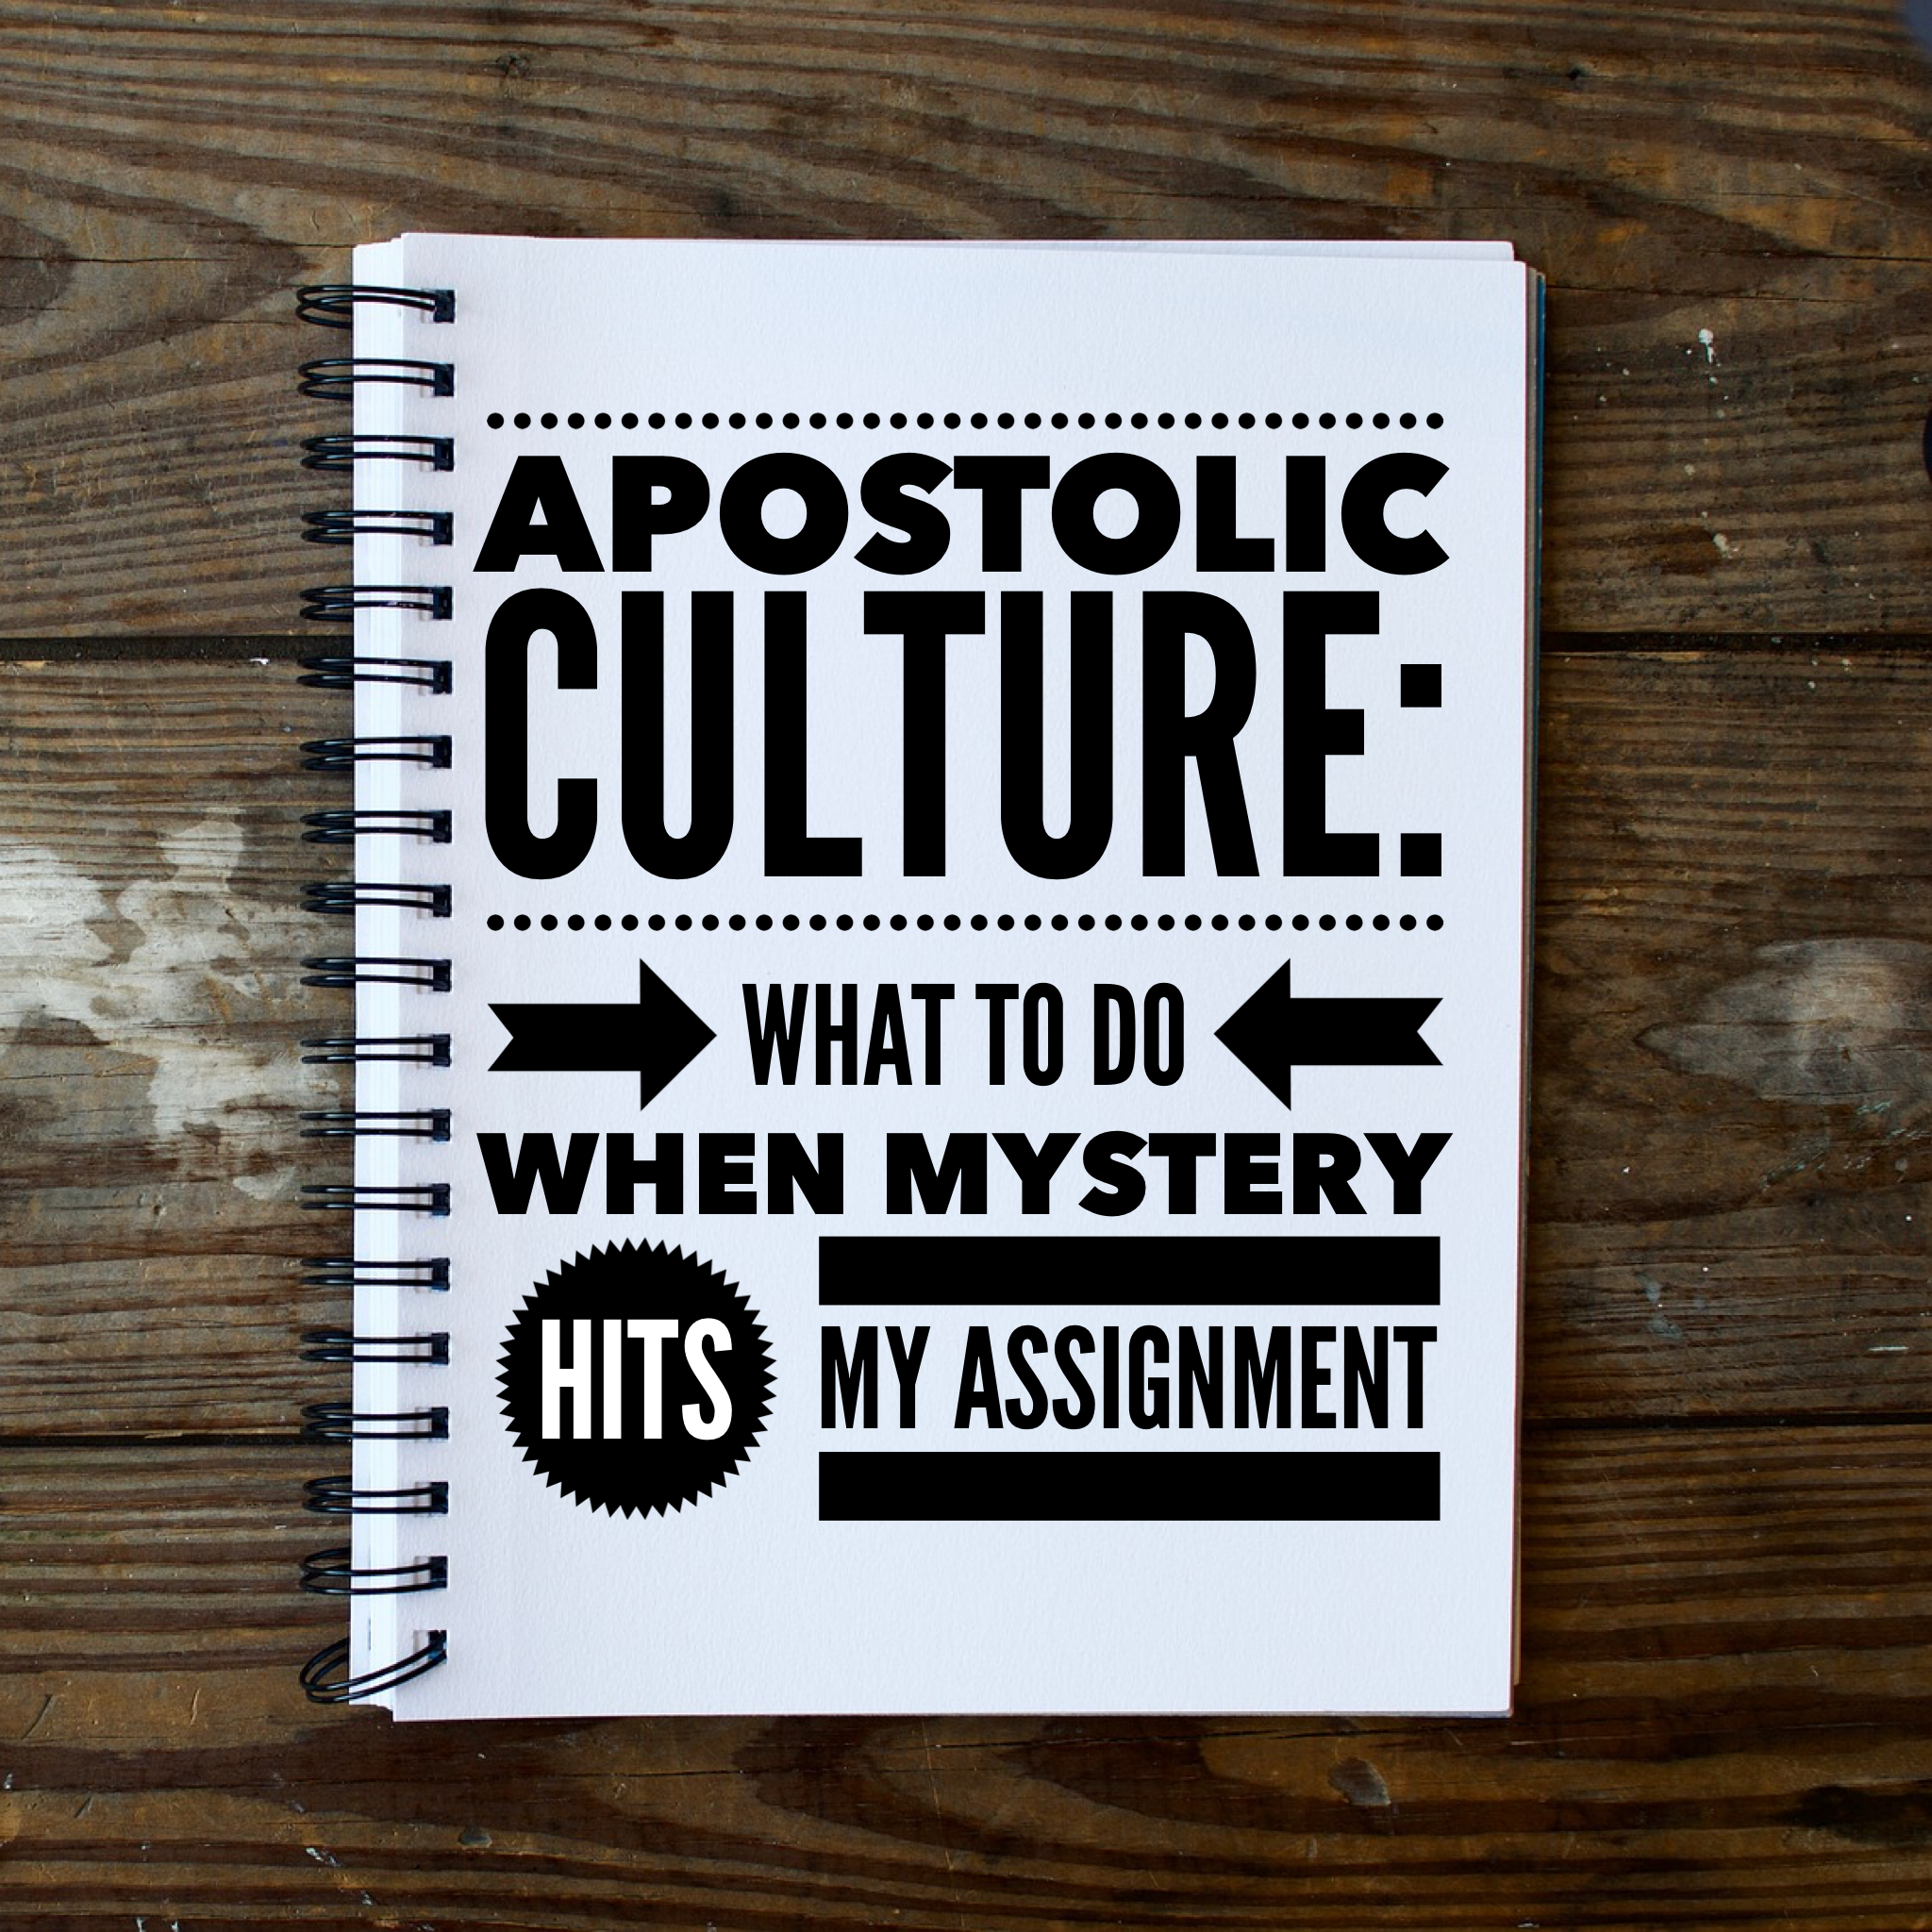 Apostolic Culture: What to Do When Mystery Hits My Assignment - 3/19/19